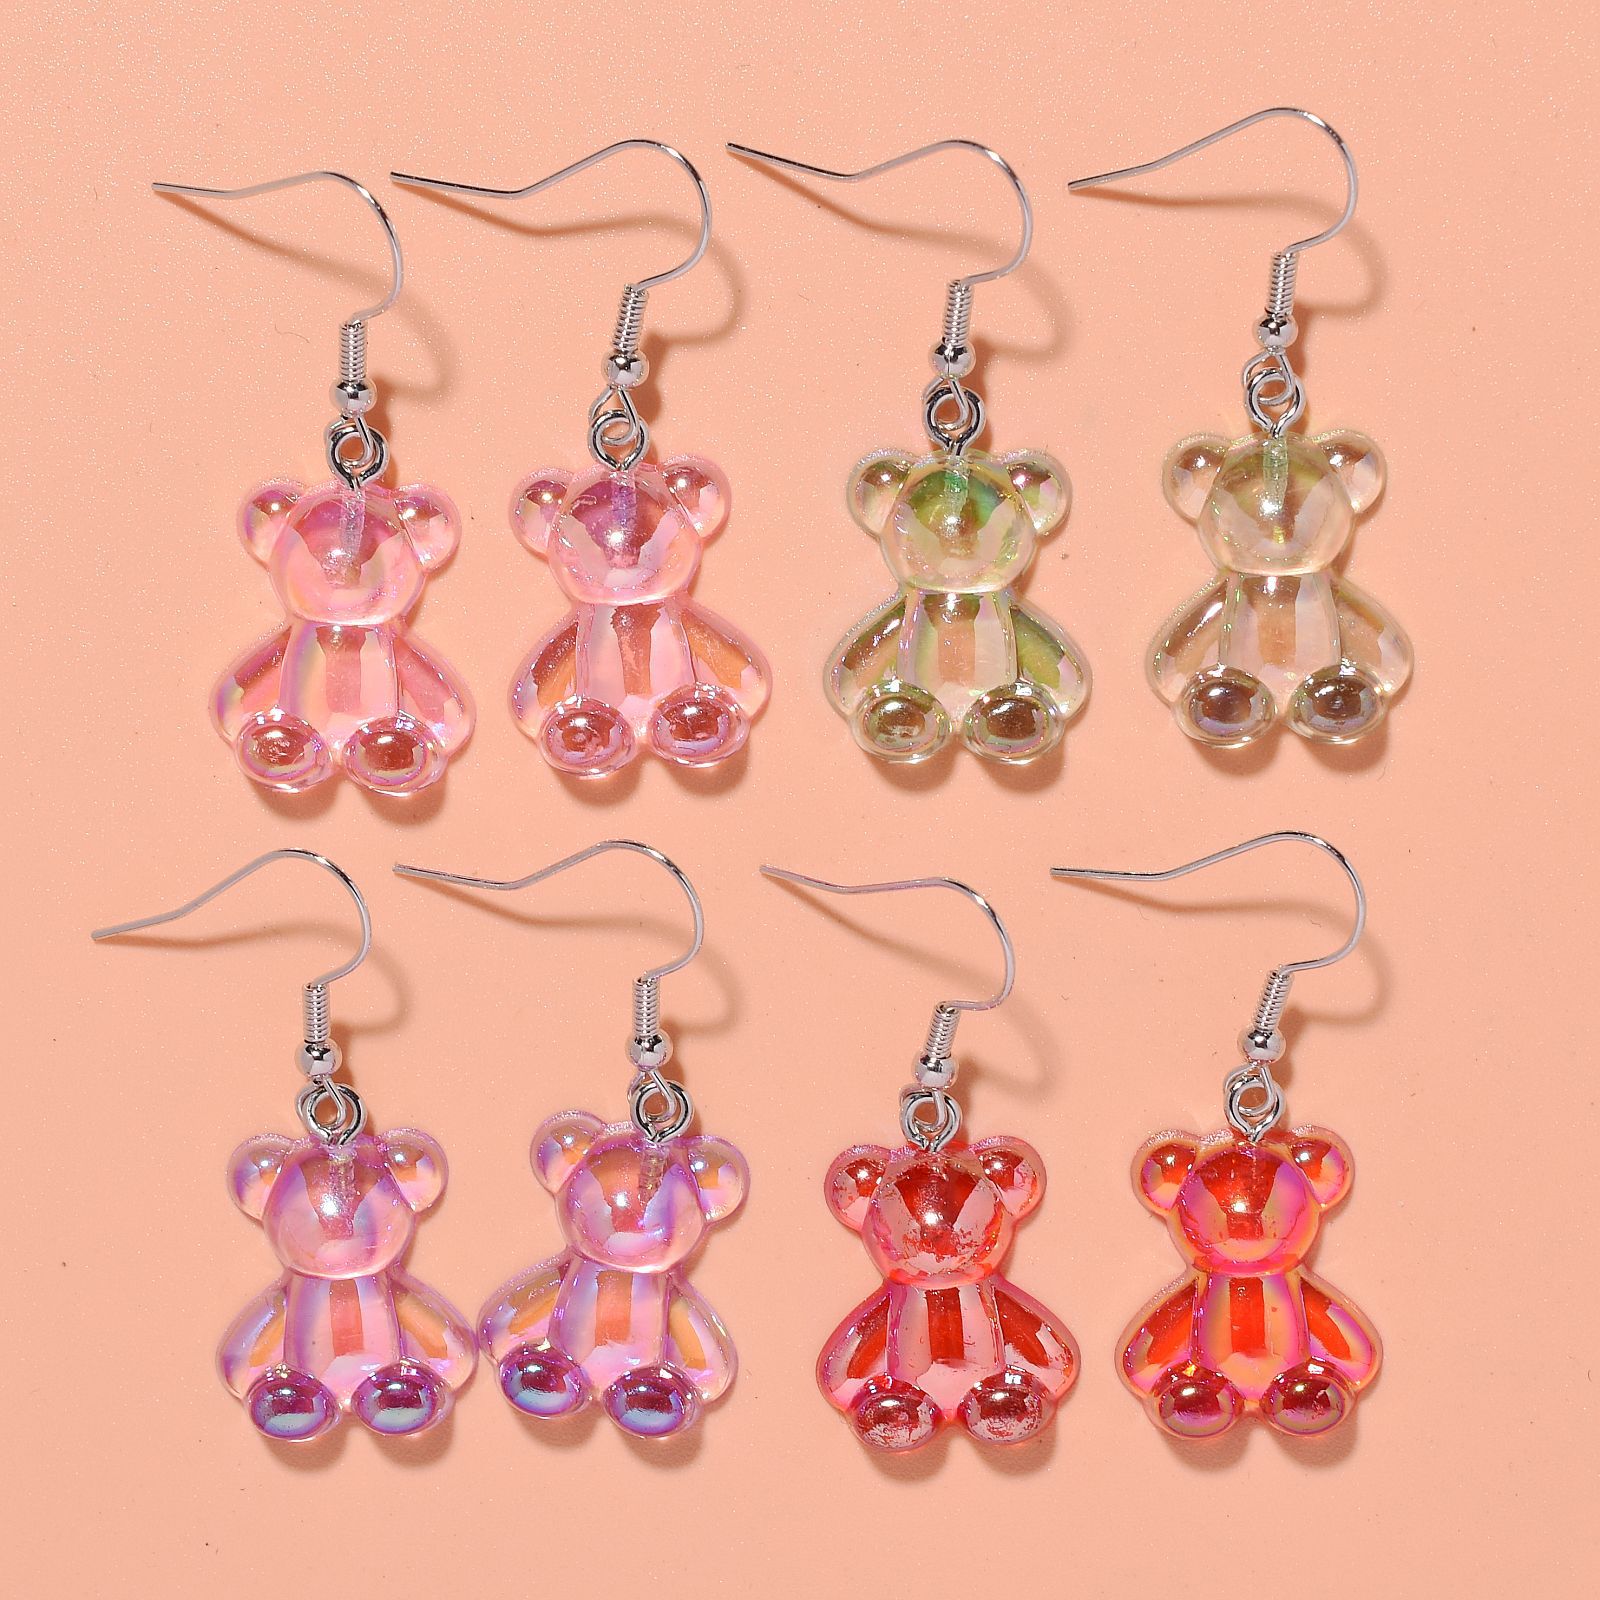 cross-border new arrival colorful transparent acrylic bear earrings trendy simple ins style fun girly heart-shaped earrings mixed batch